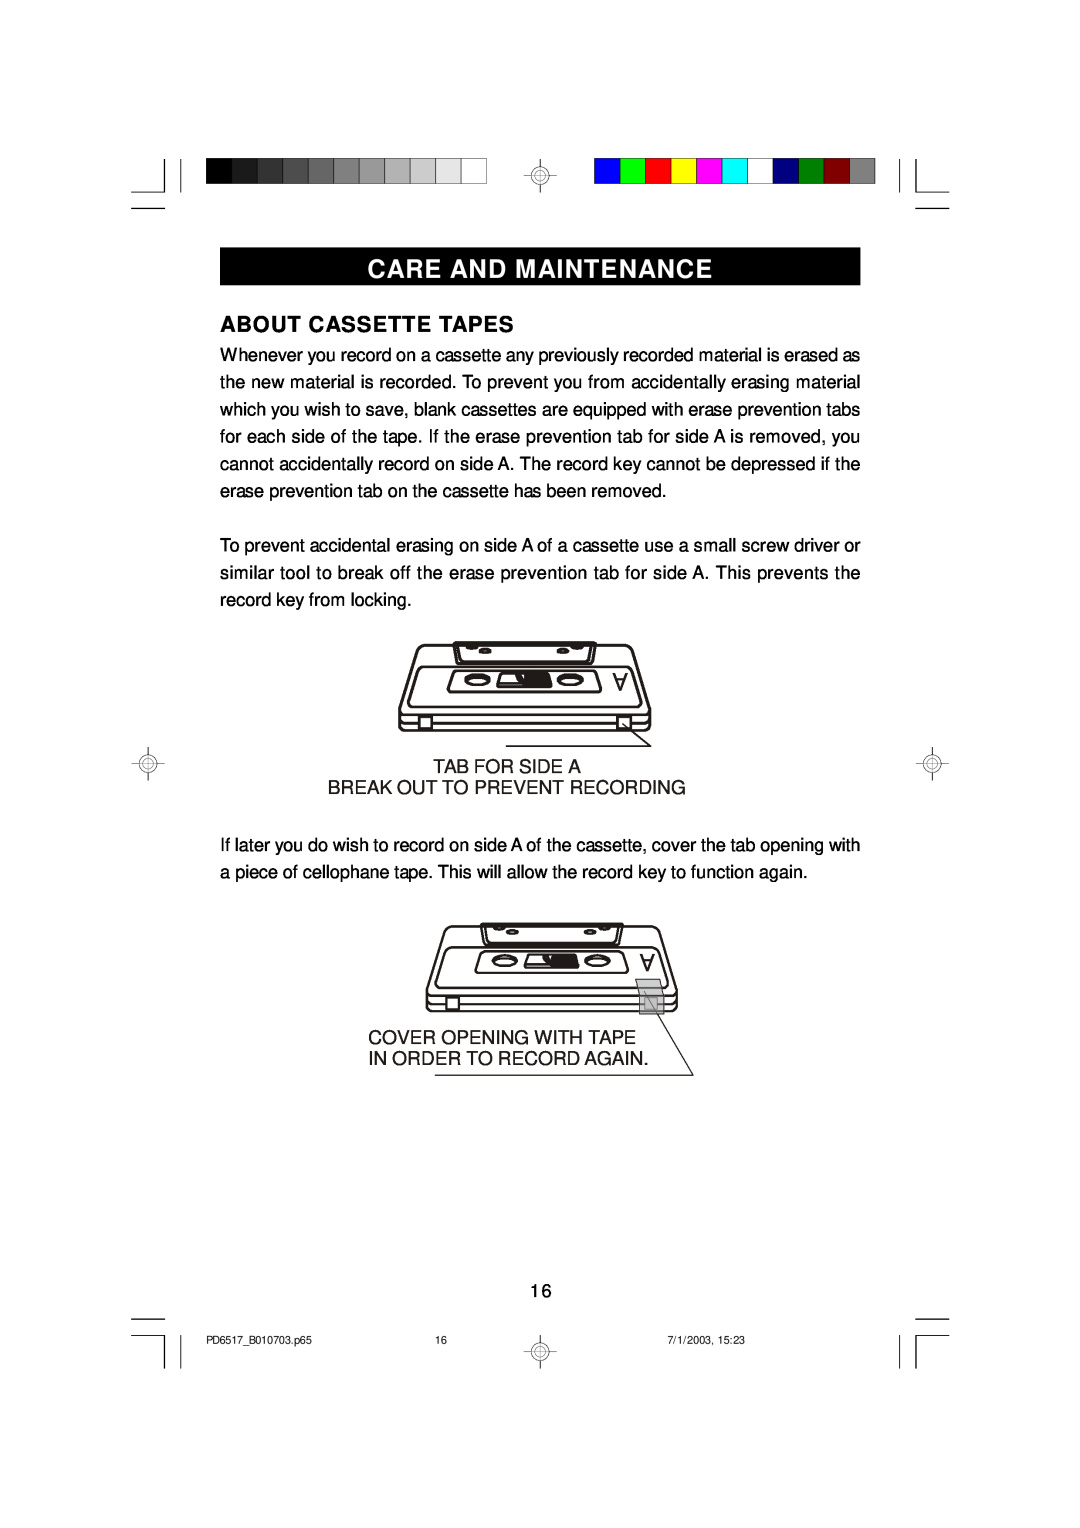 Emerson PD6517 owner manual Care And Maintenance, About Cassette Tapes, Tab For Side A Break Out To Prevent Recording 